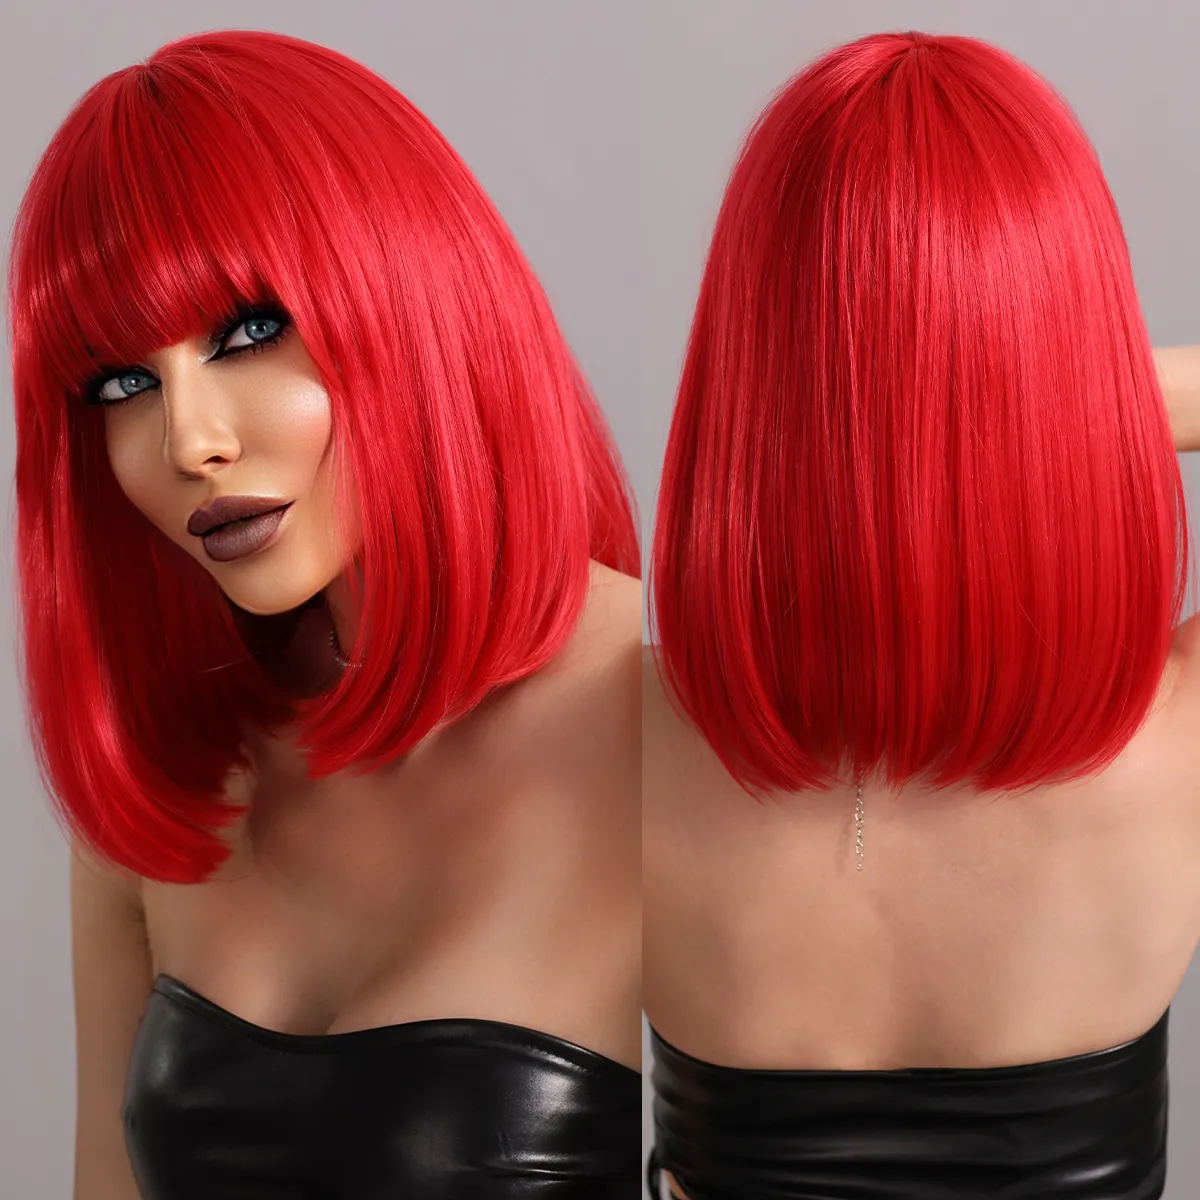 Red Wig With Bangs Short Straight Bob Wigs For Women Heat Resistant Synthetic Costume Burgundy Red Wig Party Cosplay Use